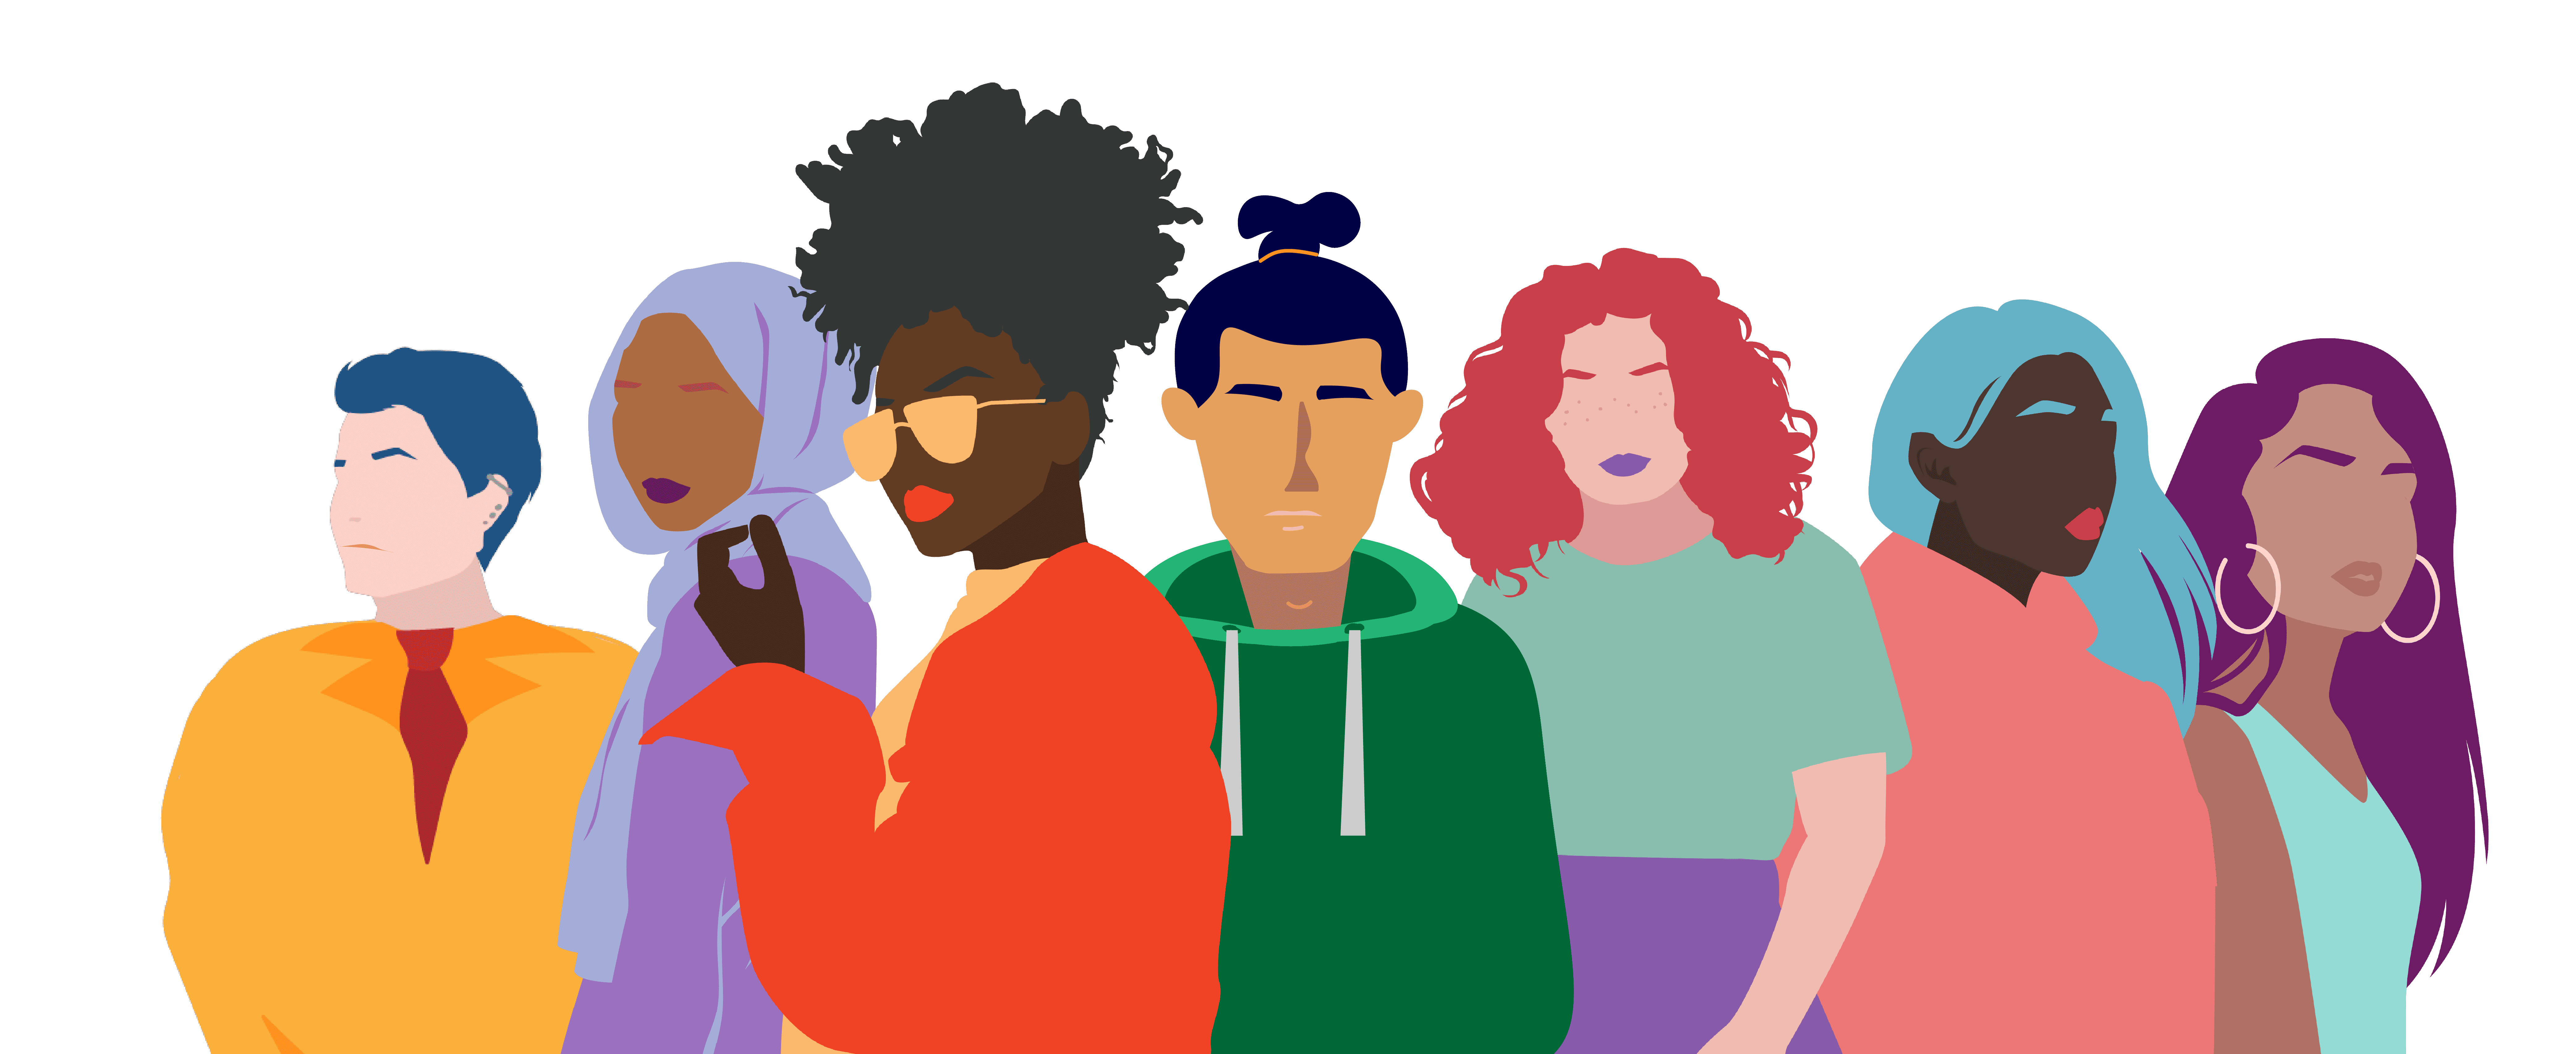 Graphic of a diverse group of people: header image